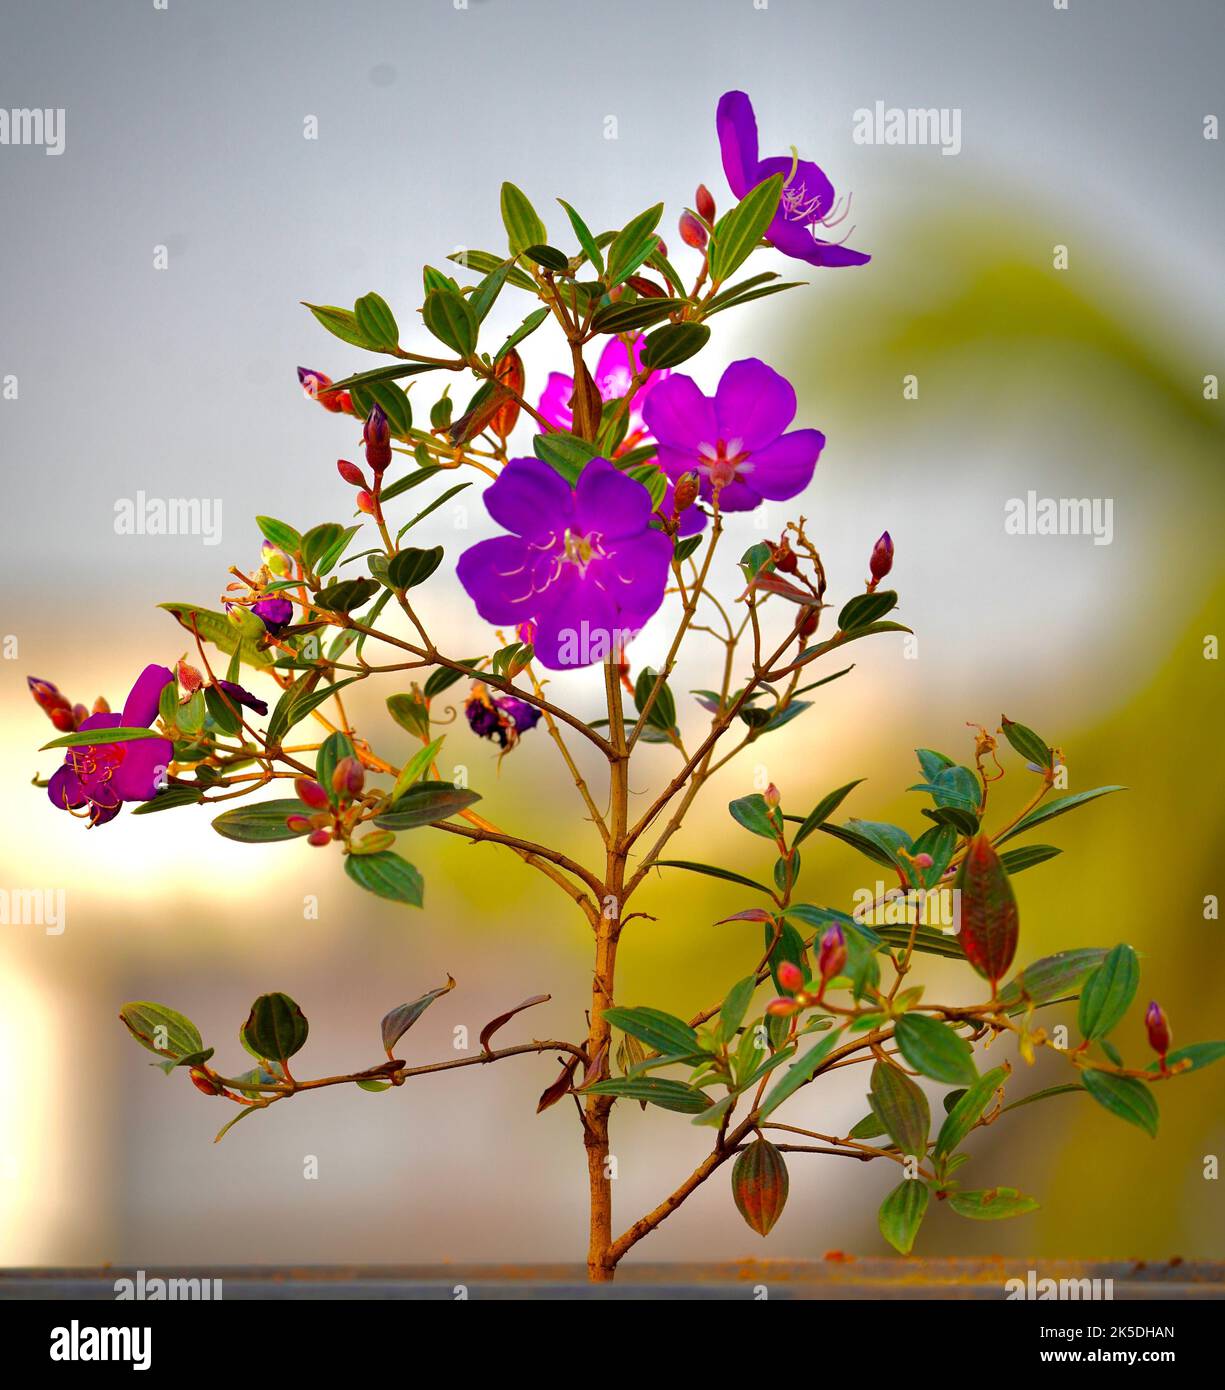 A shallow focus of delicate purple lasiandra flowers Stock Photo